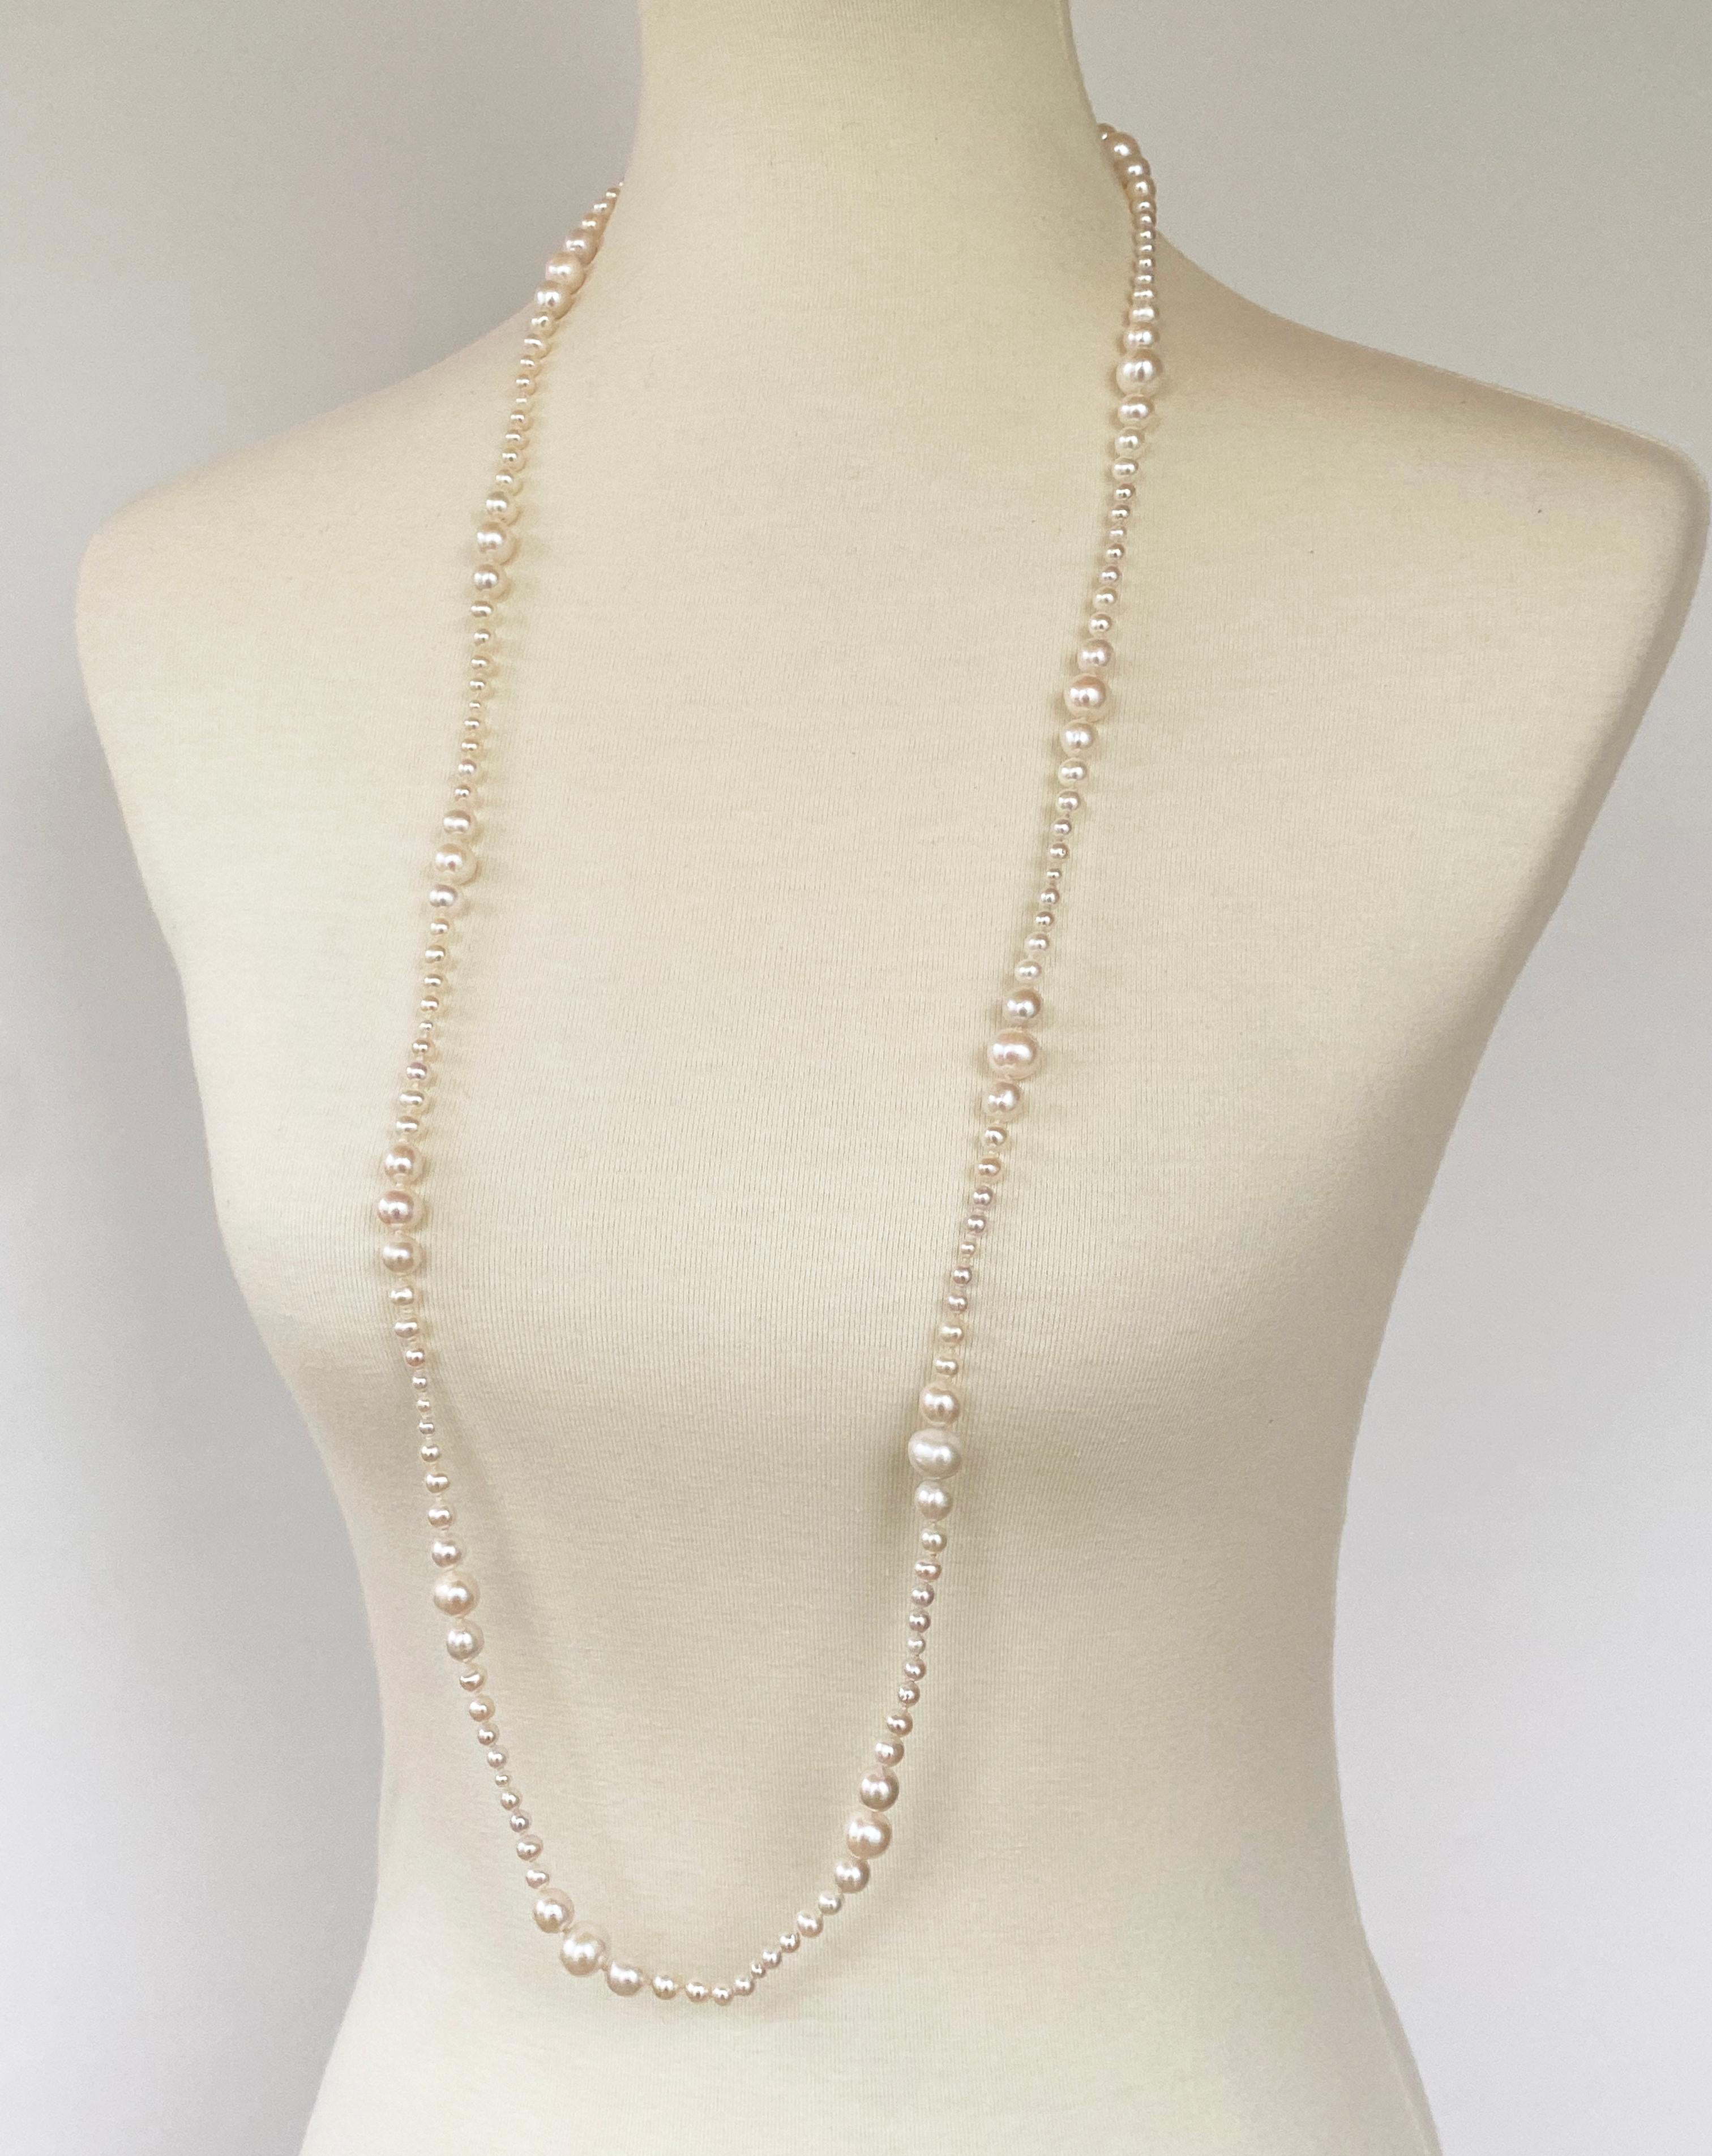 Bead Marina J. Graduated Pearl Necklace with 14k White Gold Clasp